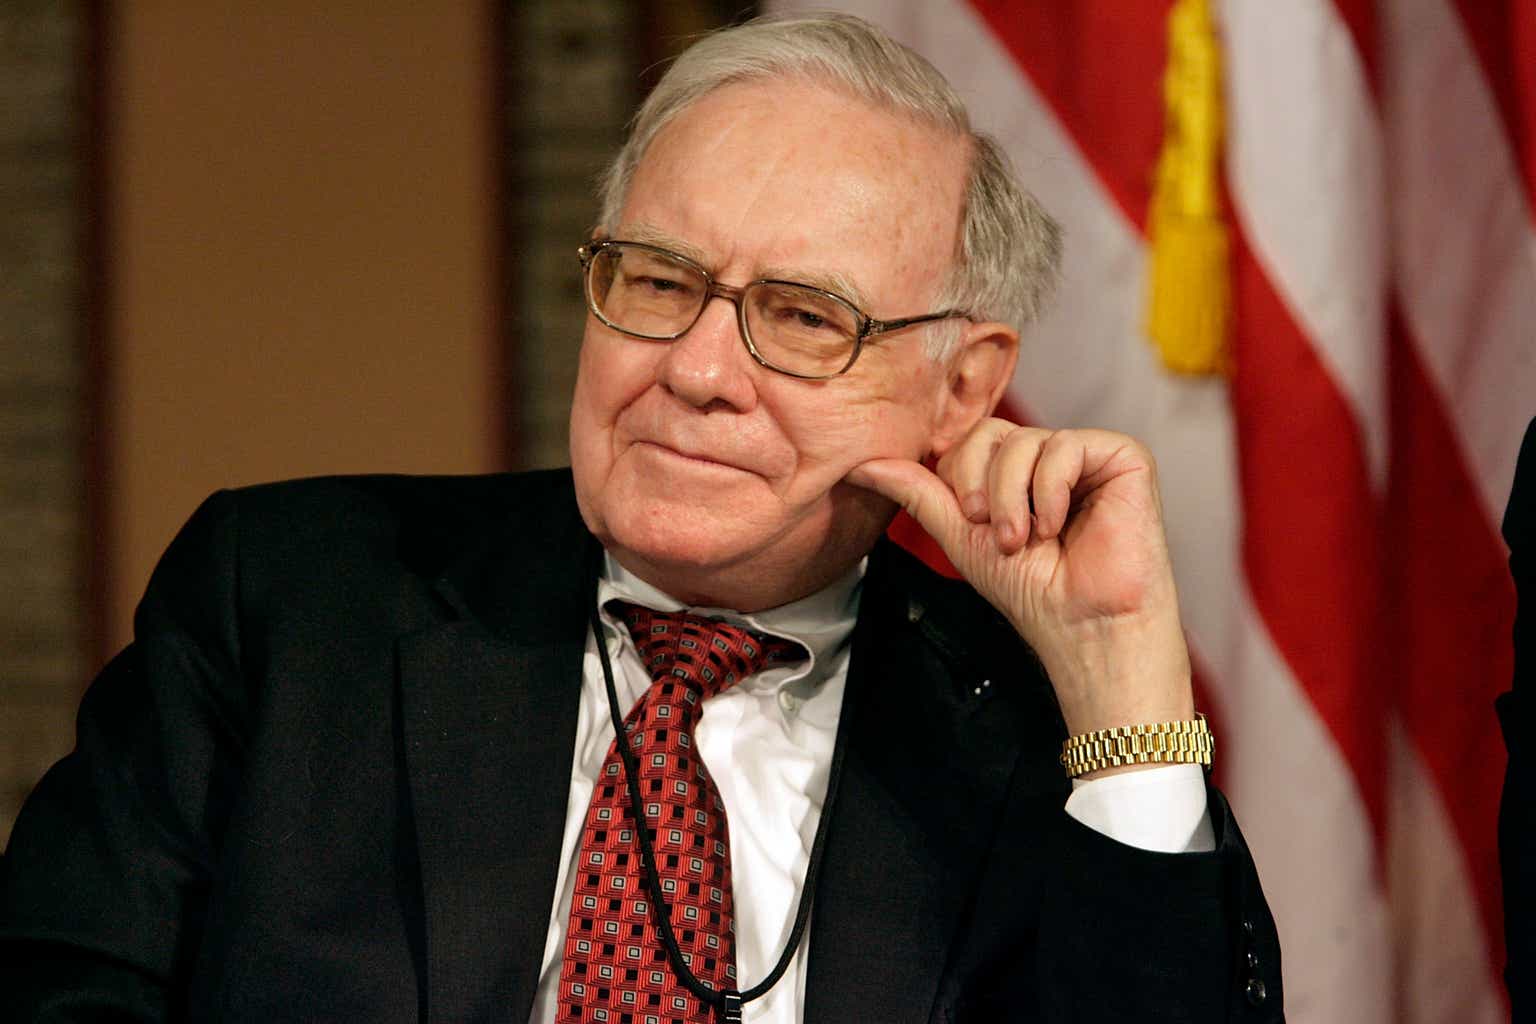 Buffett Just Sold Dividend Kings Johnson & Johnson And Procter & Gamble - Buy This One Instead